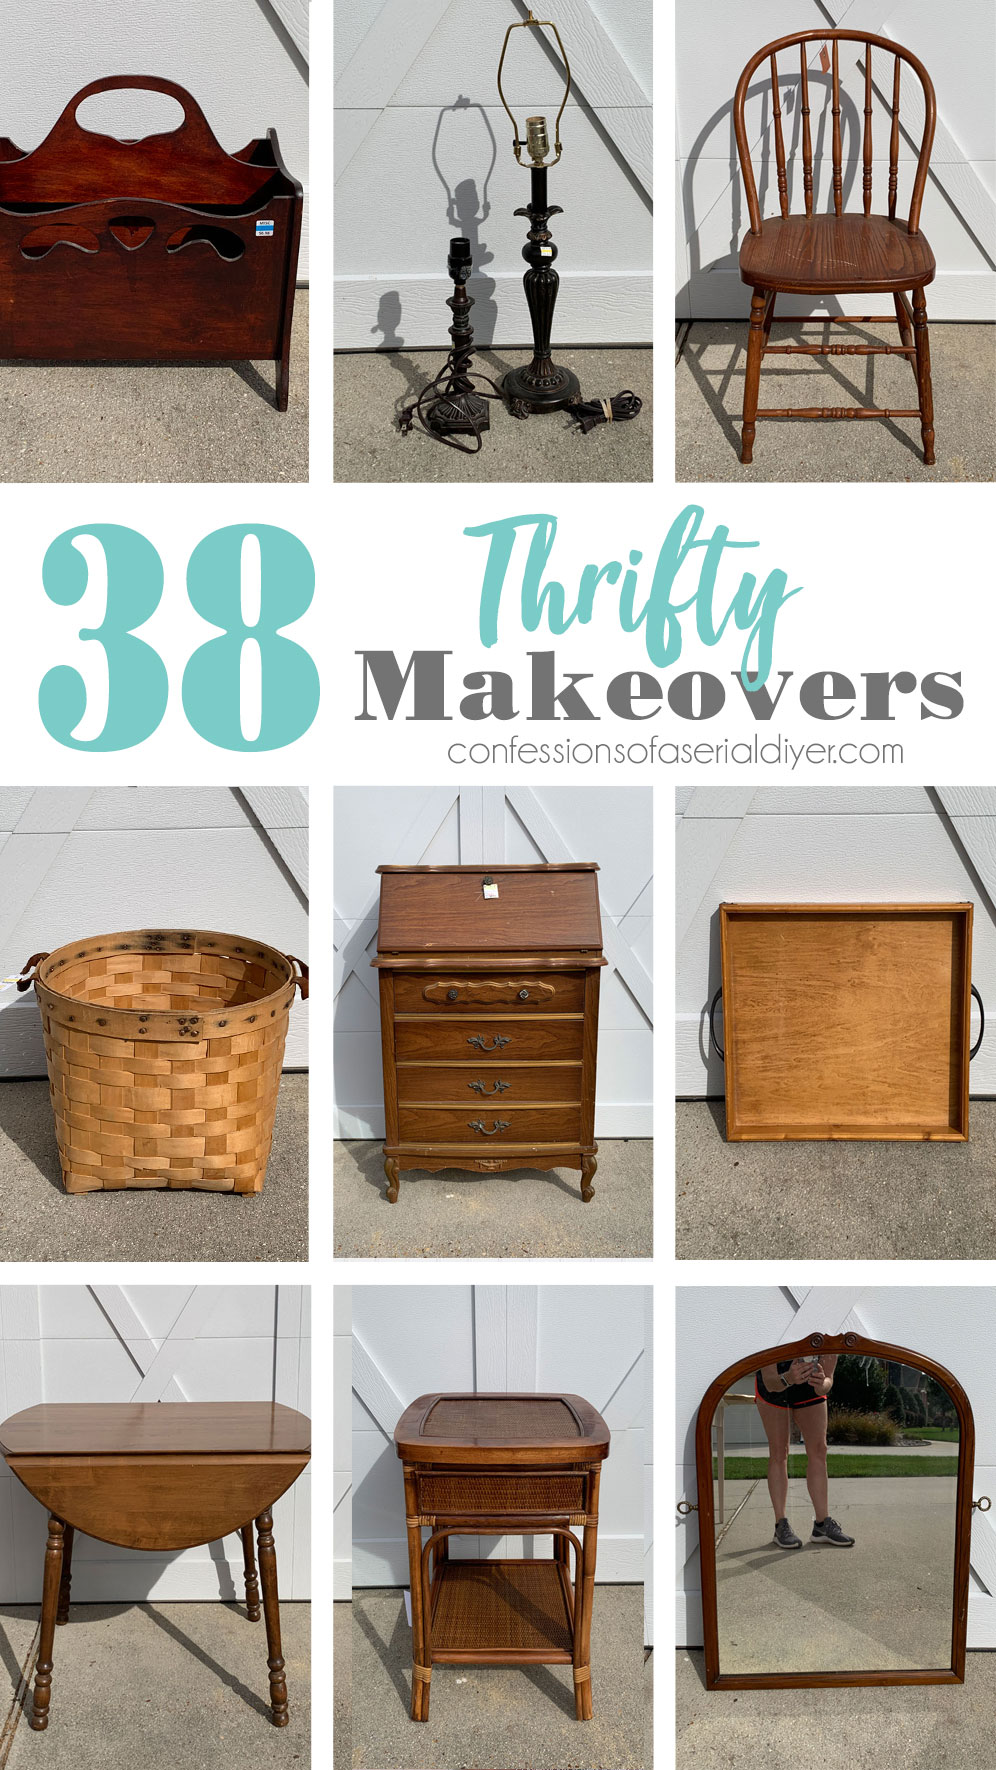 38 Thrifty Makeovers